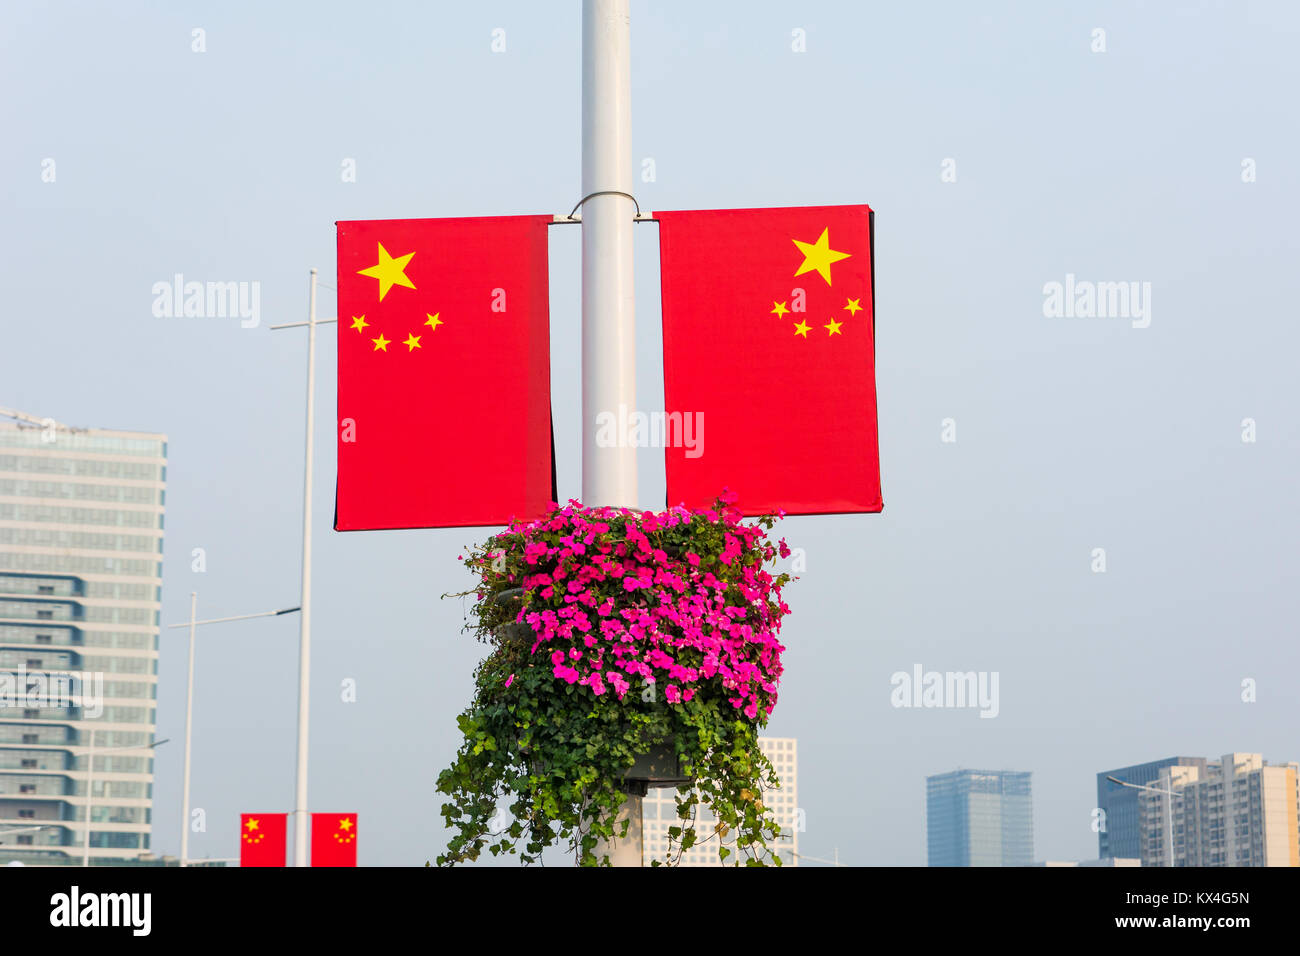 Chinese flag placed on street lights by the road Stock Photo